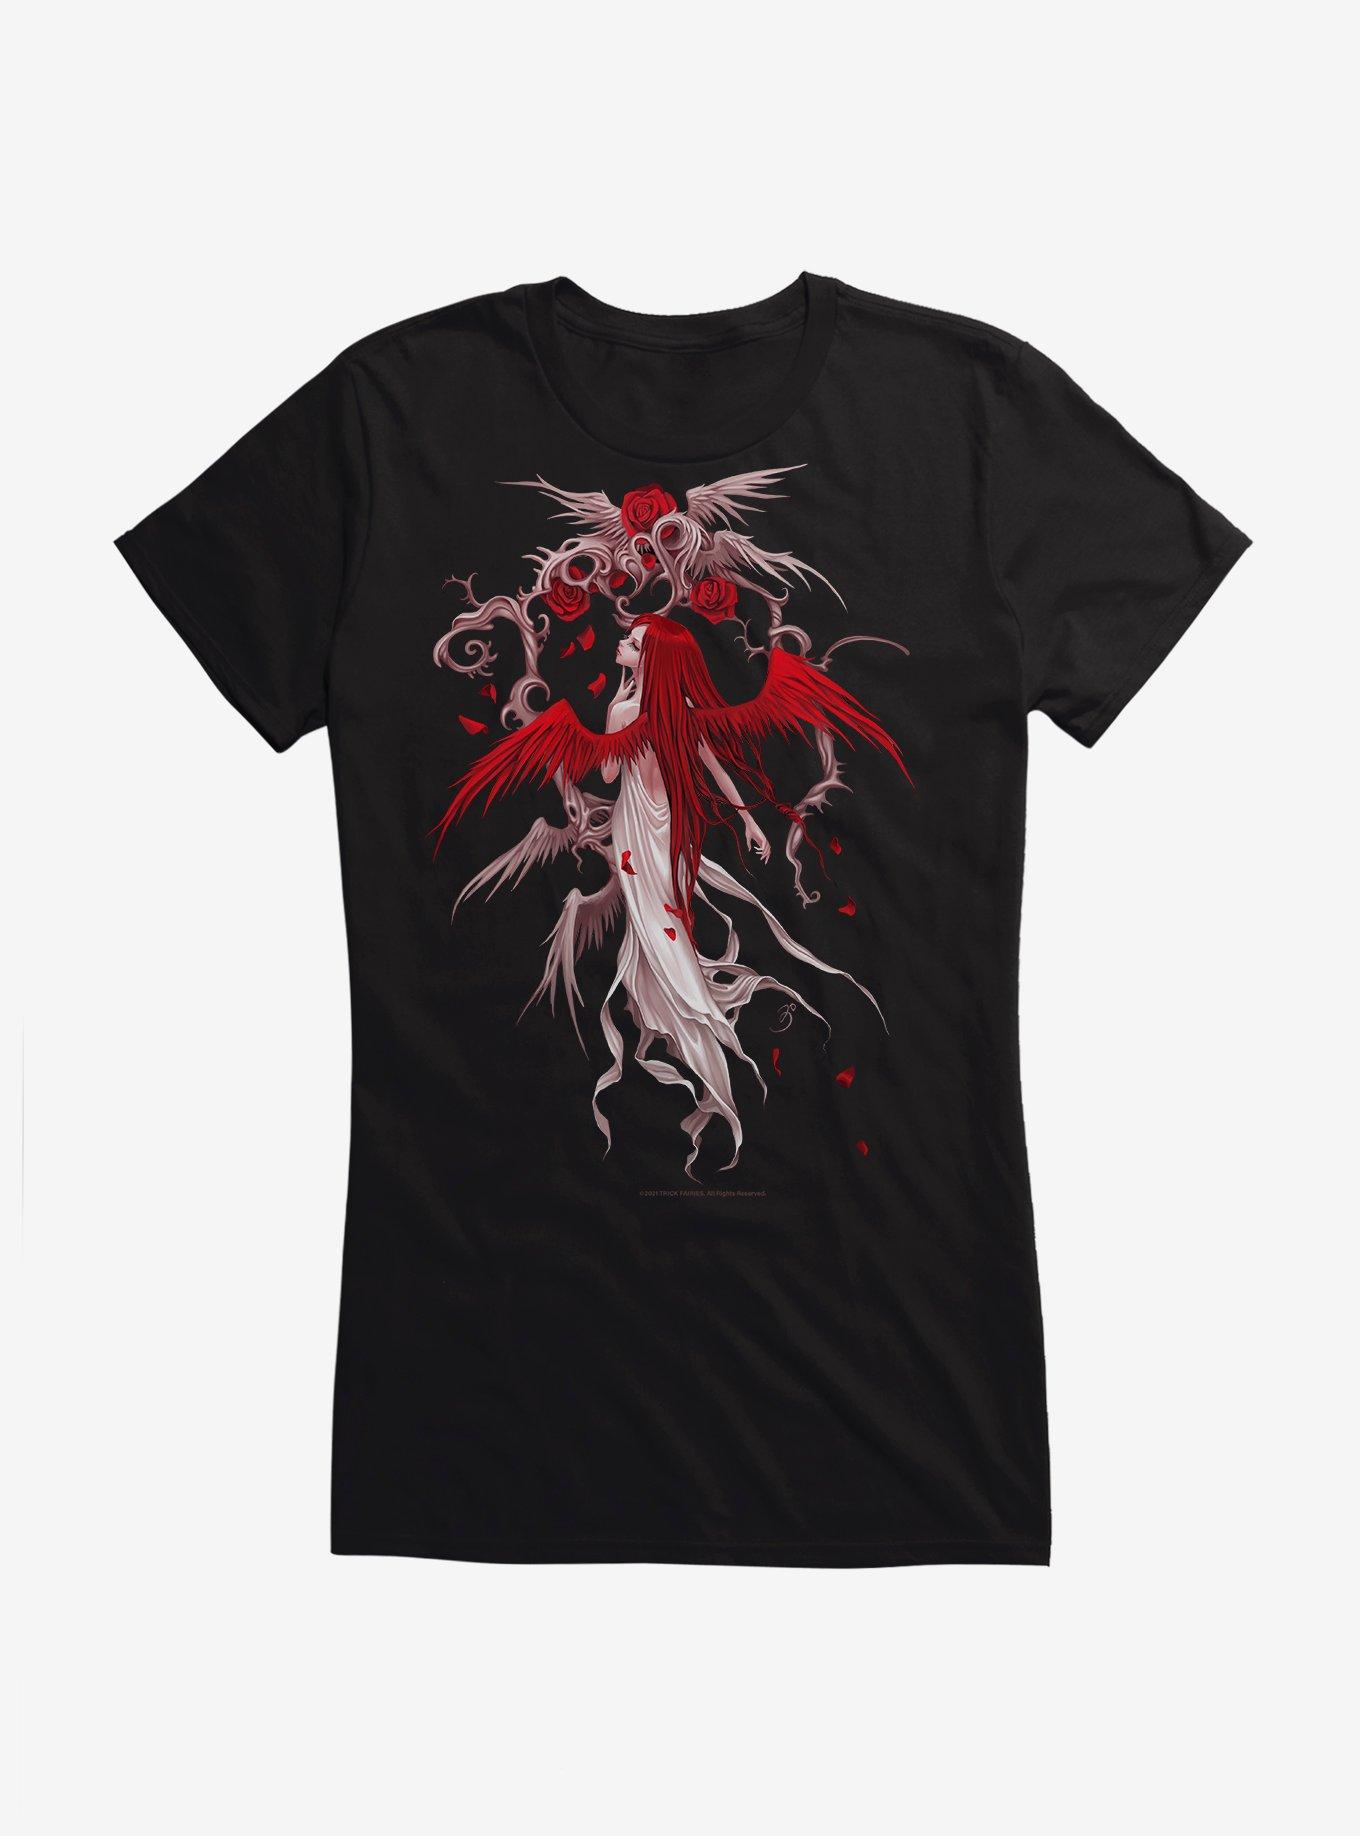 Fairies By Trick Red Rose Fairy Girls T-Shirt